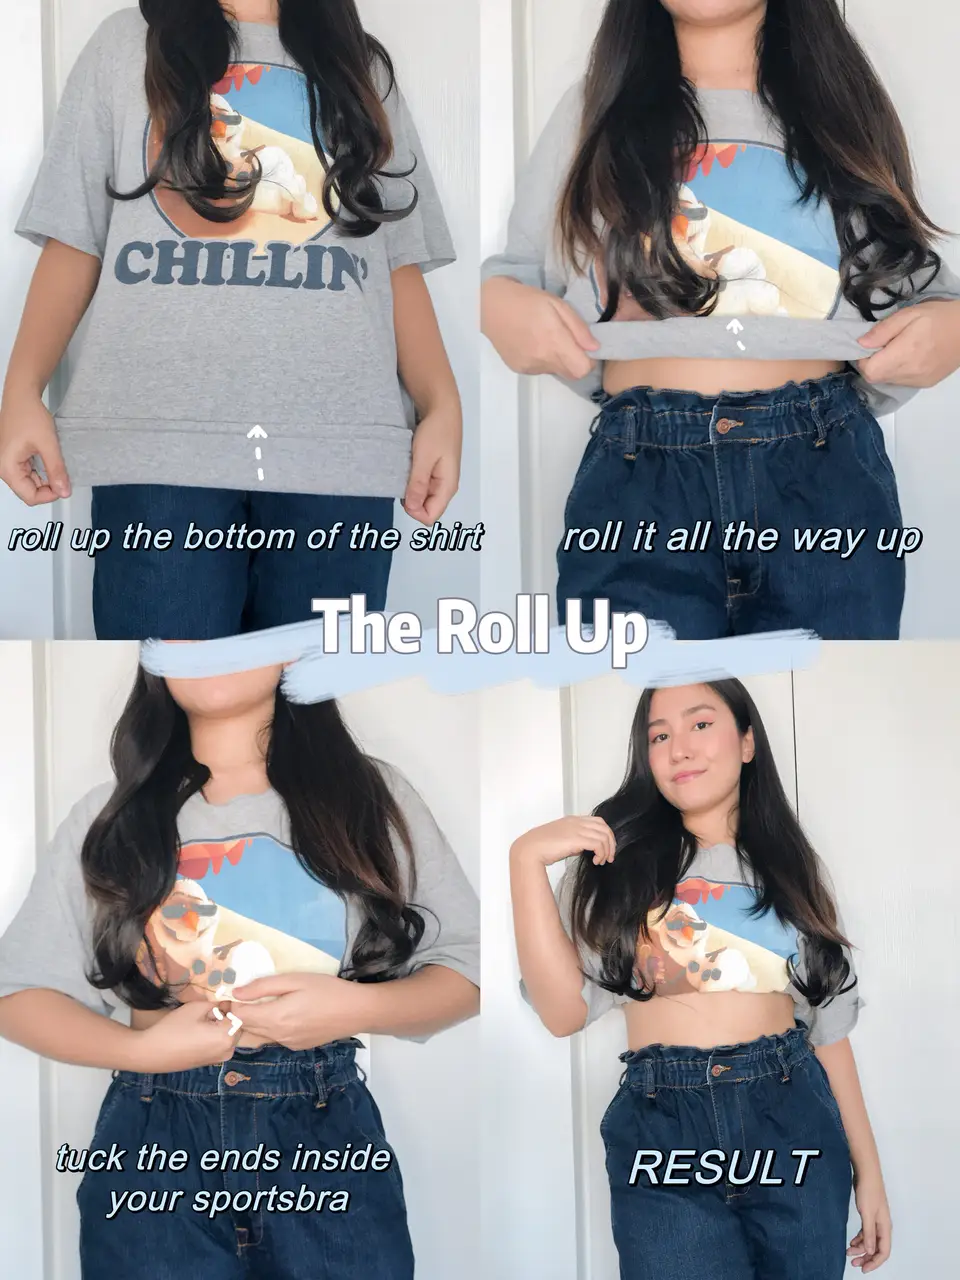 7 Reasons Why Croptuck Is The Best Way To Crop And Tuck Your Shirt